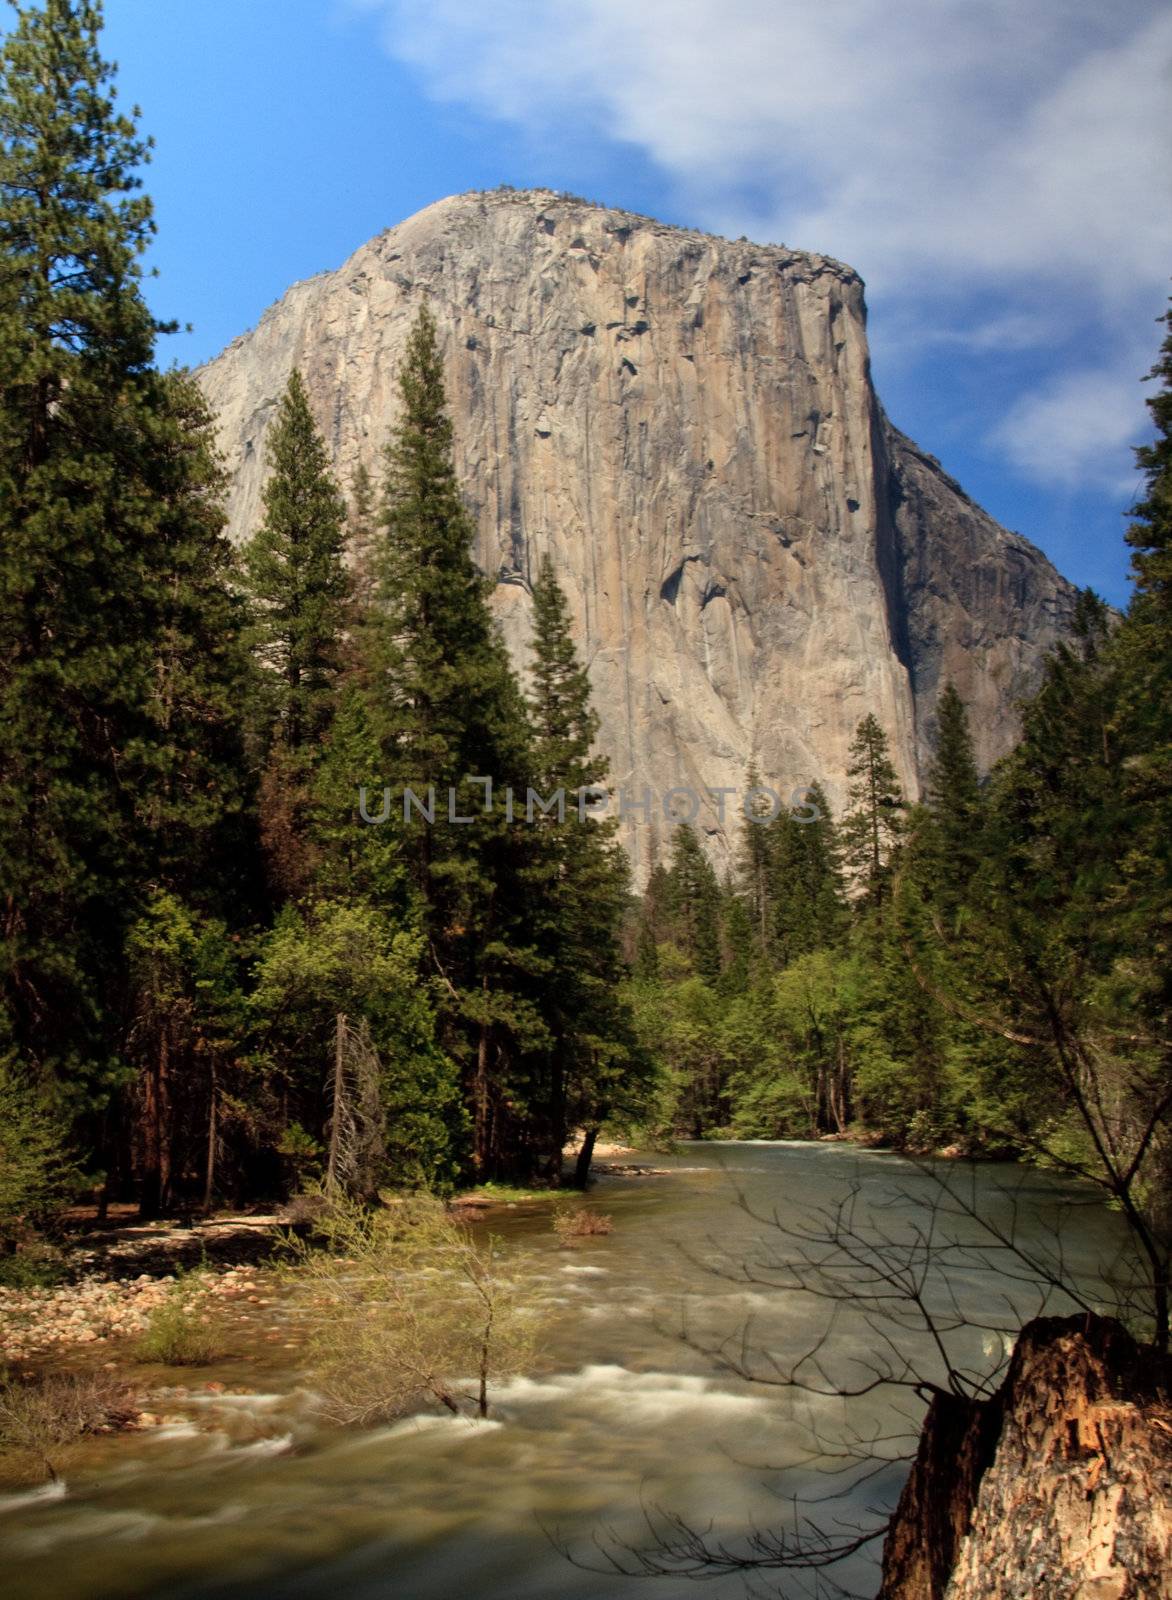 Slow motion river in front of El Capitan by steheap